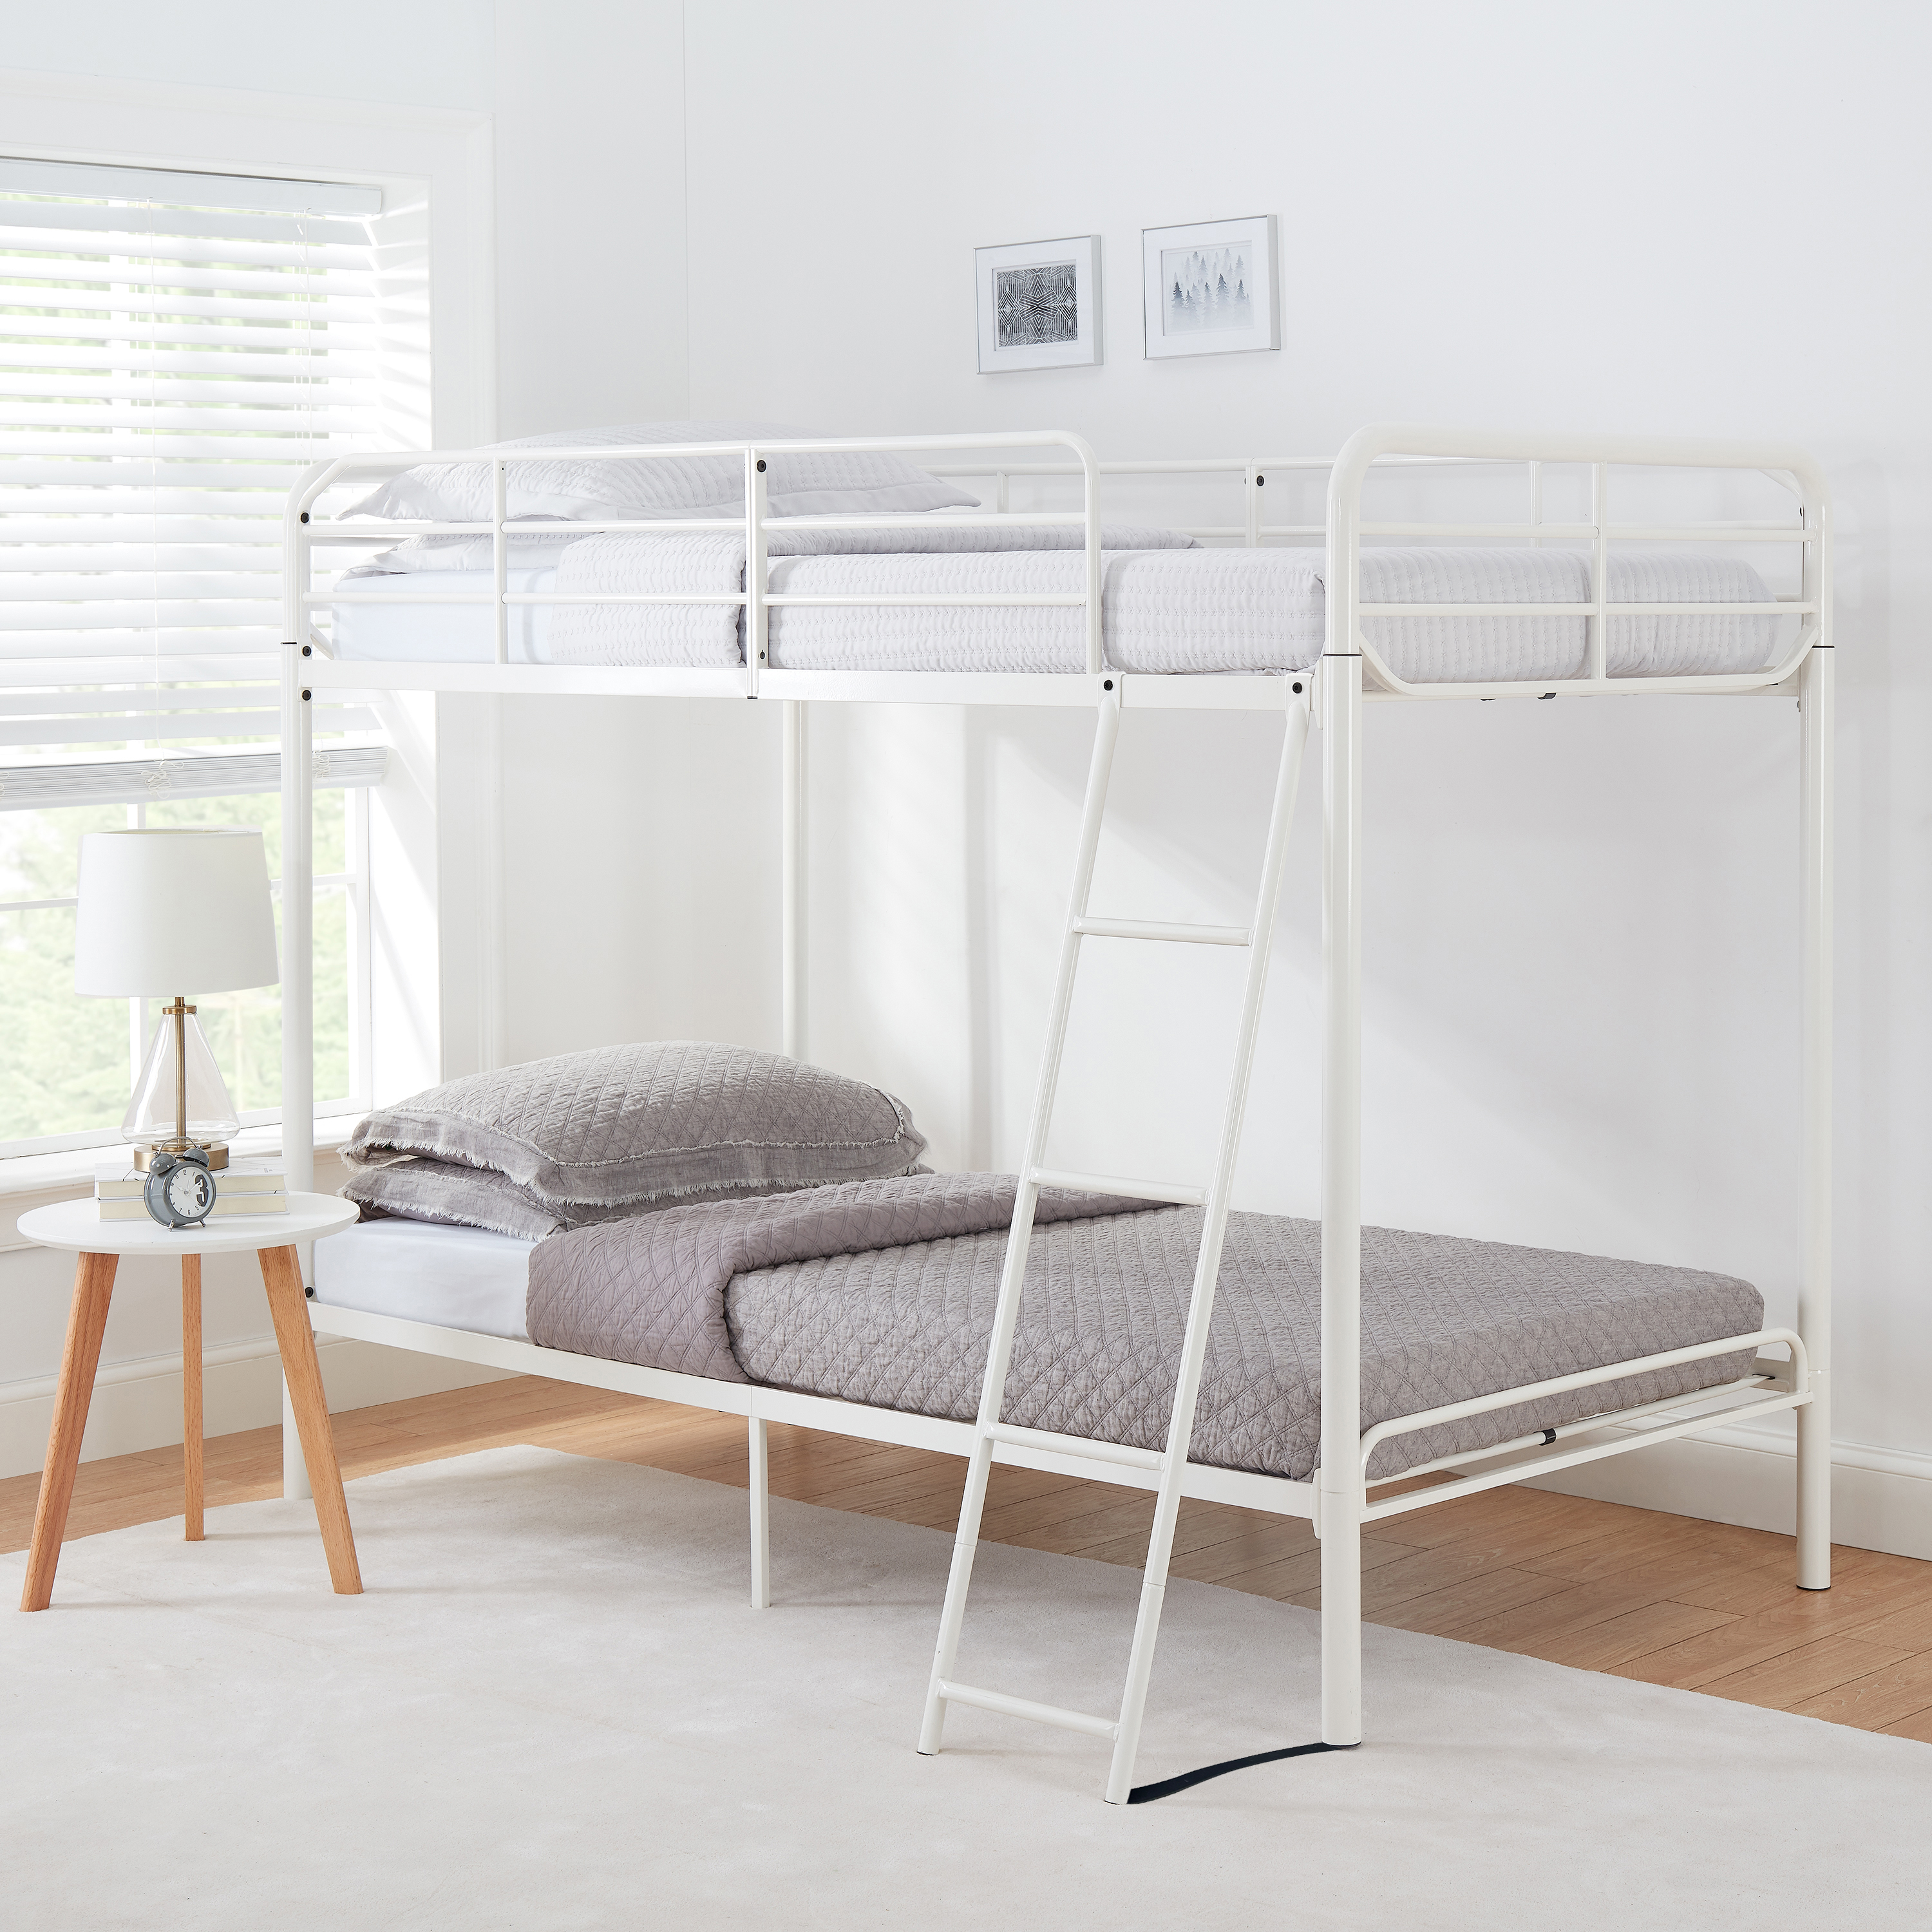 Metal Bunk Bed Twin Over Twin White